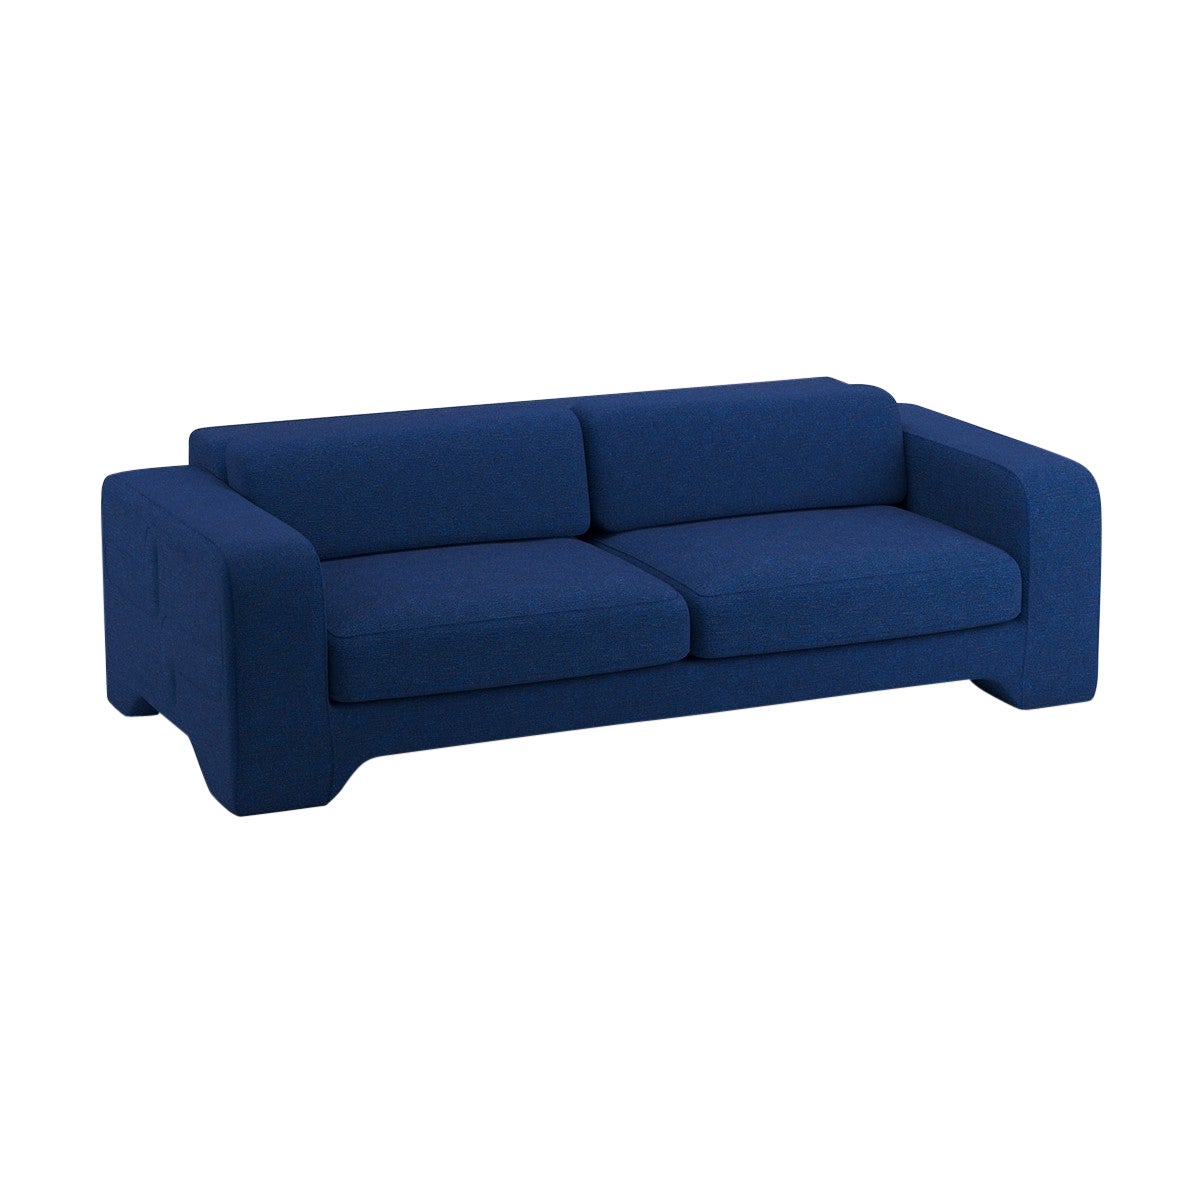 Popus Editions Giovanna 2.5 Seater Sofa in Ocean Megeve Fabric with Knit Effect